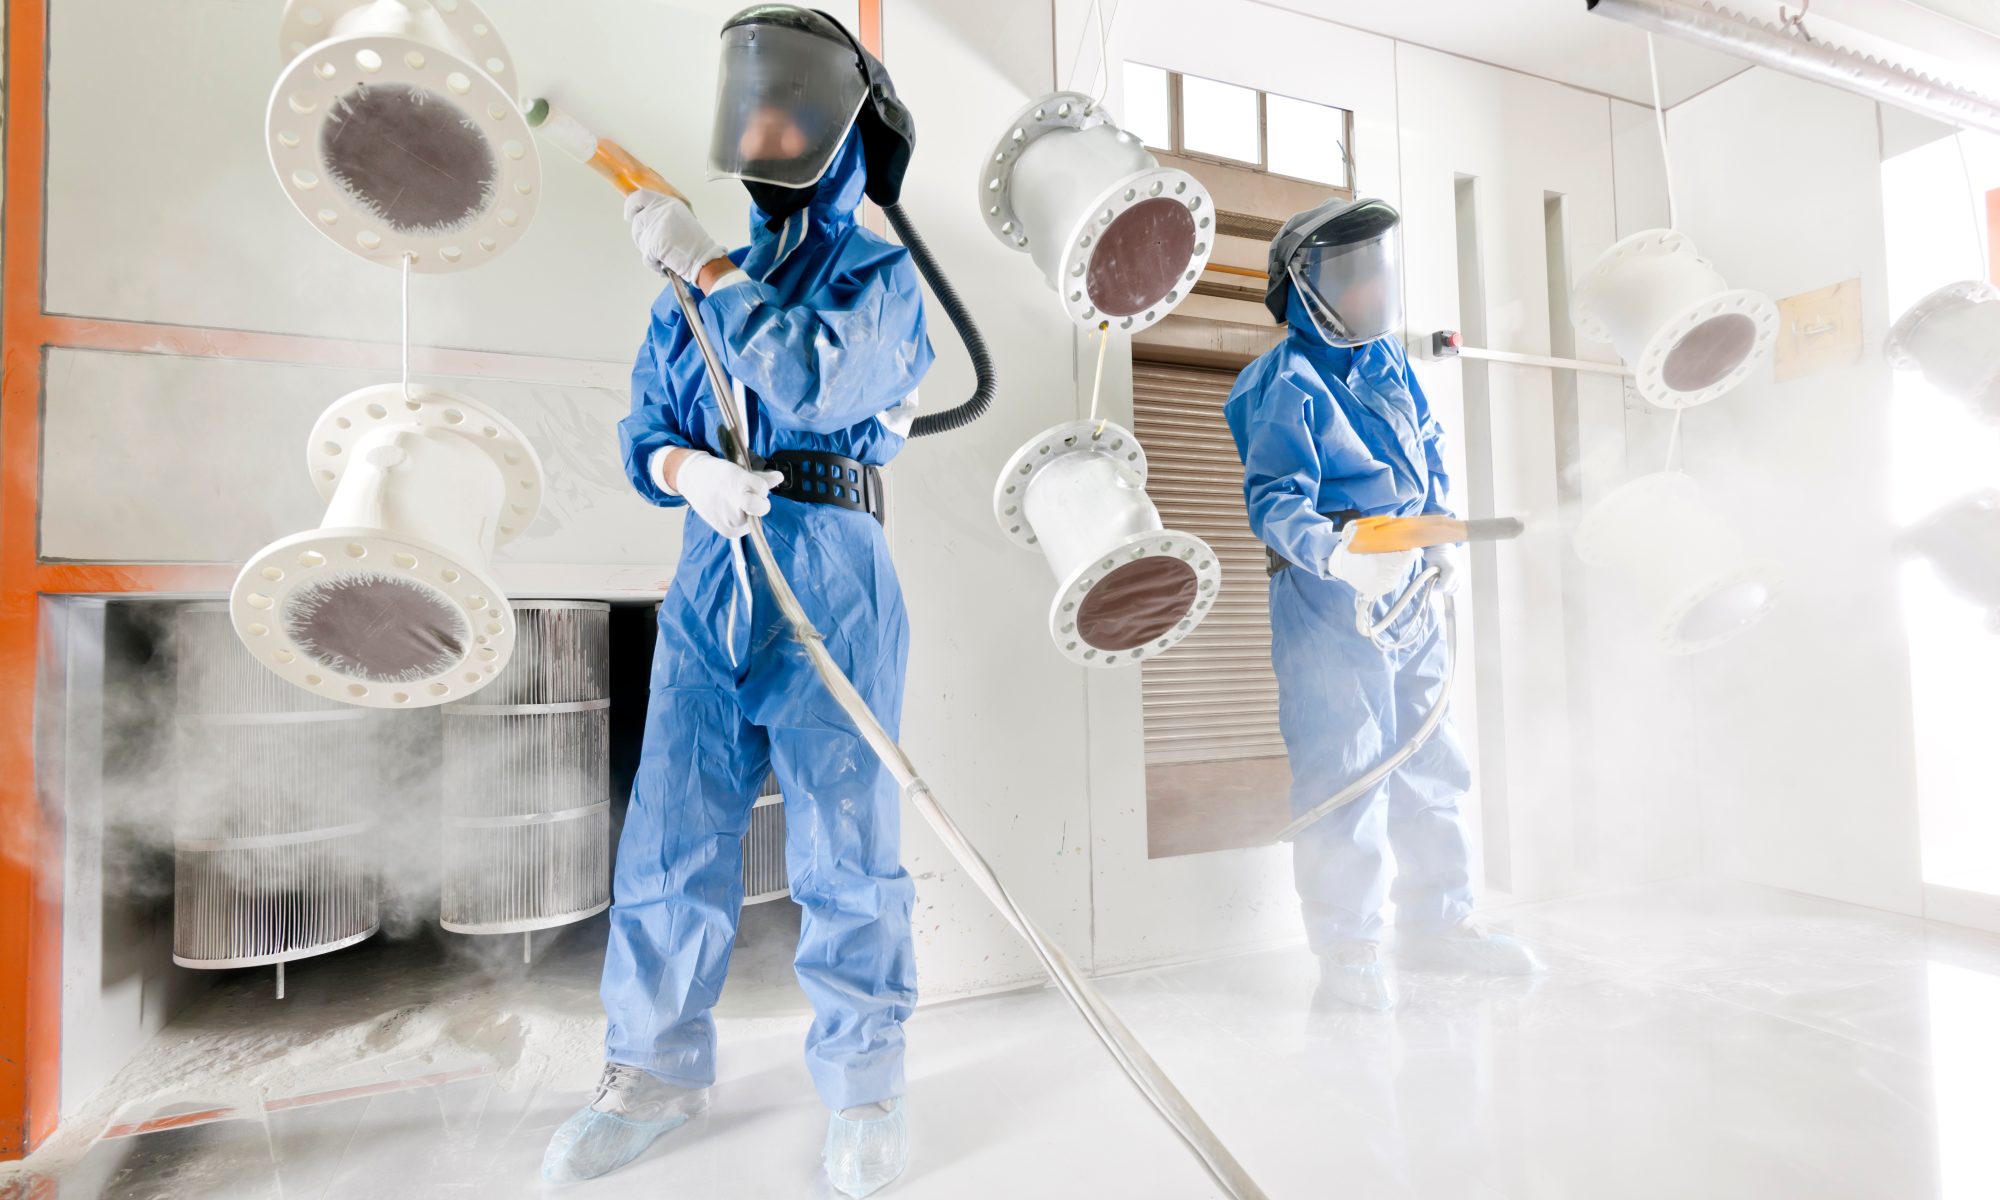 Two men in full paint suits and facemasks spray down tubing with powder-coating materials